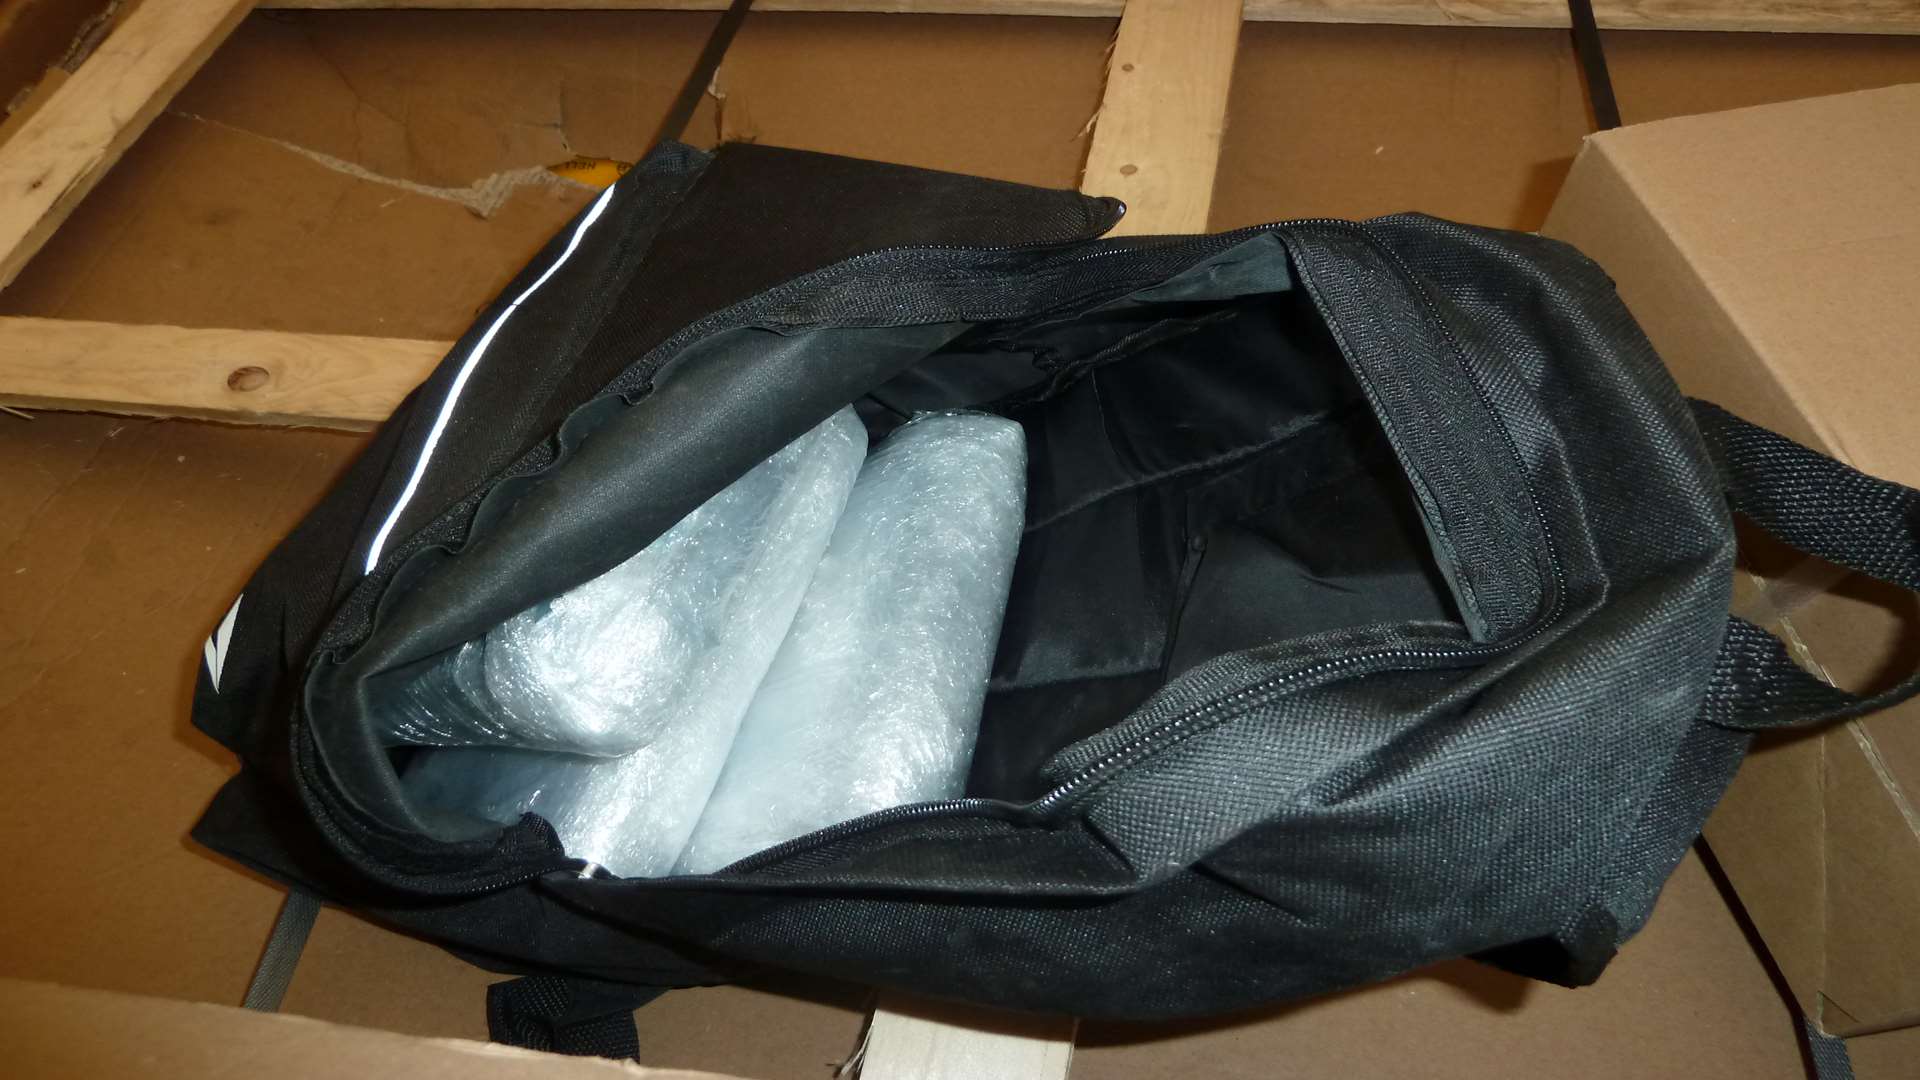 The rucksack containing three cling filmed-wrapped packages of cocaine